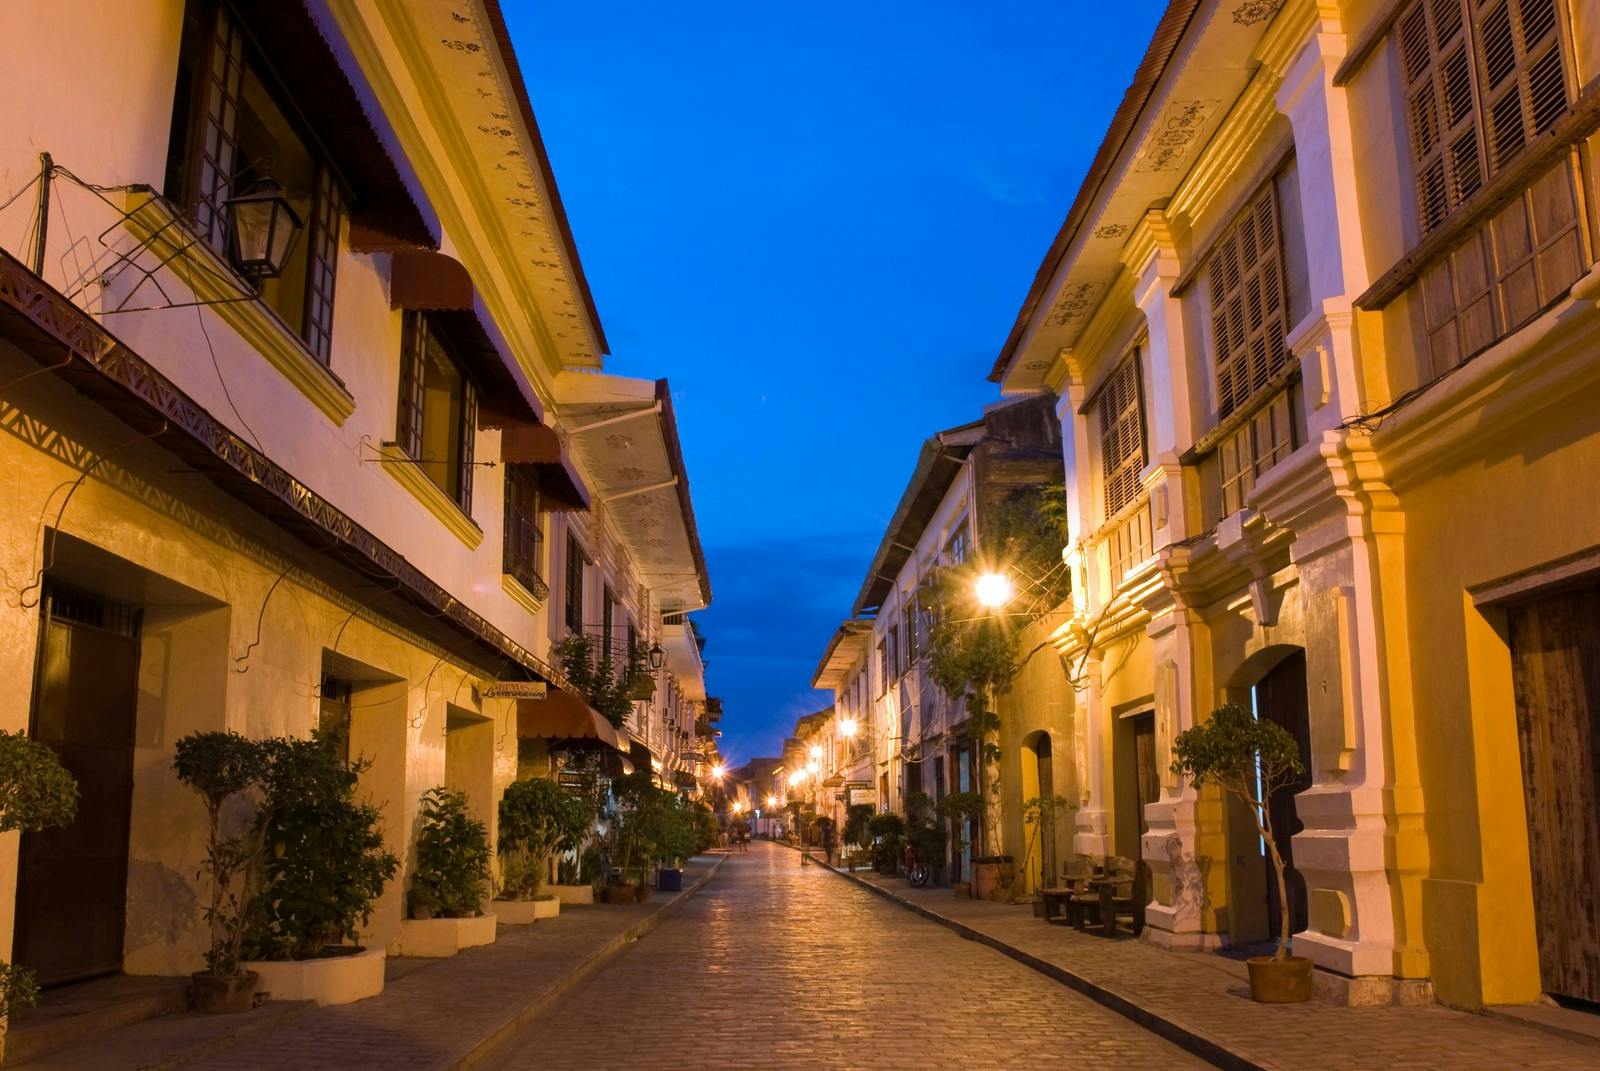 Streets of Calle Crisologo at night